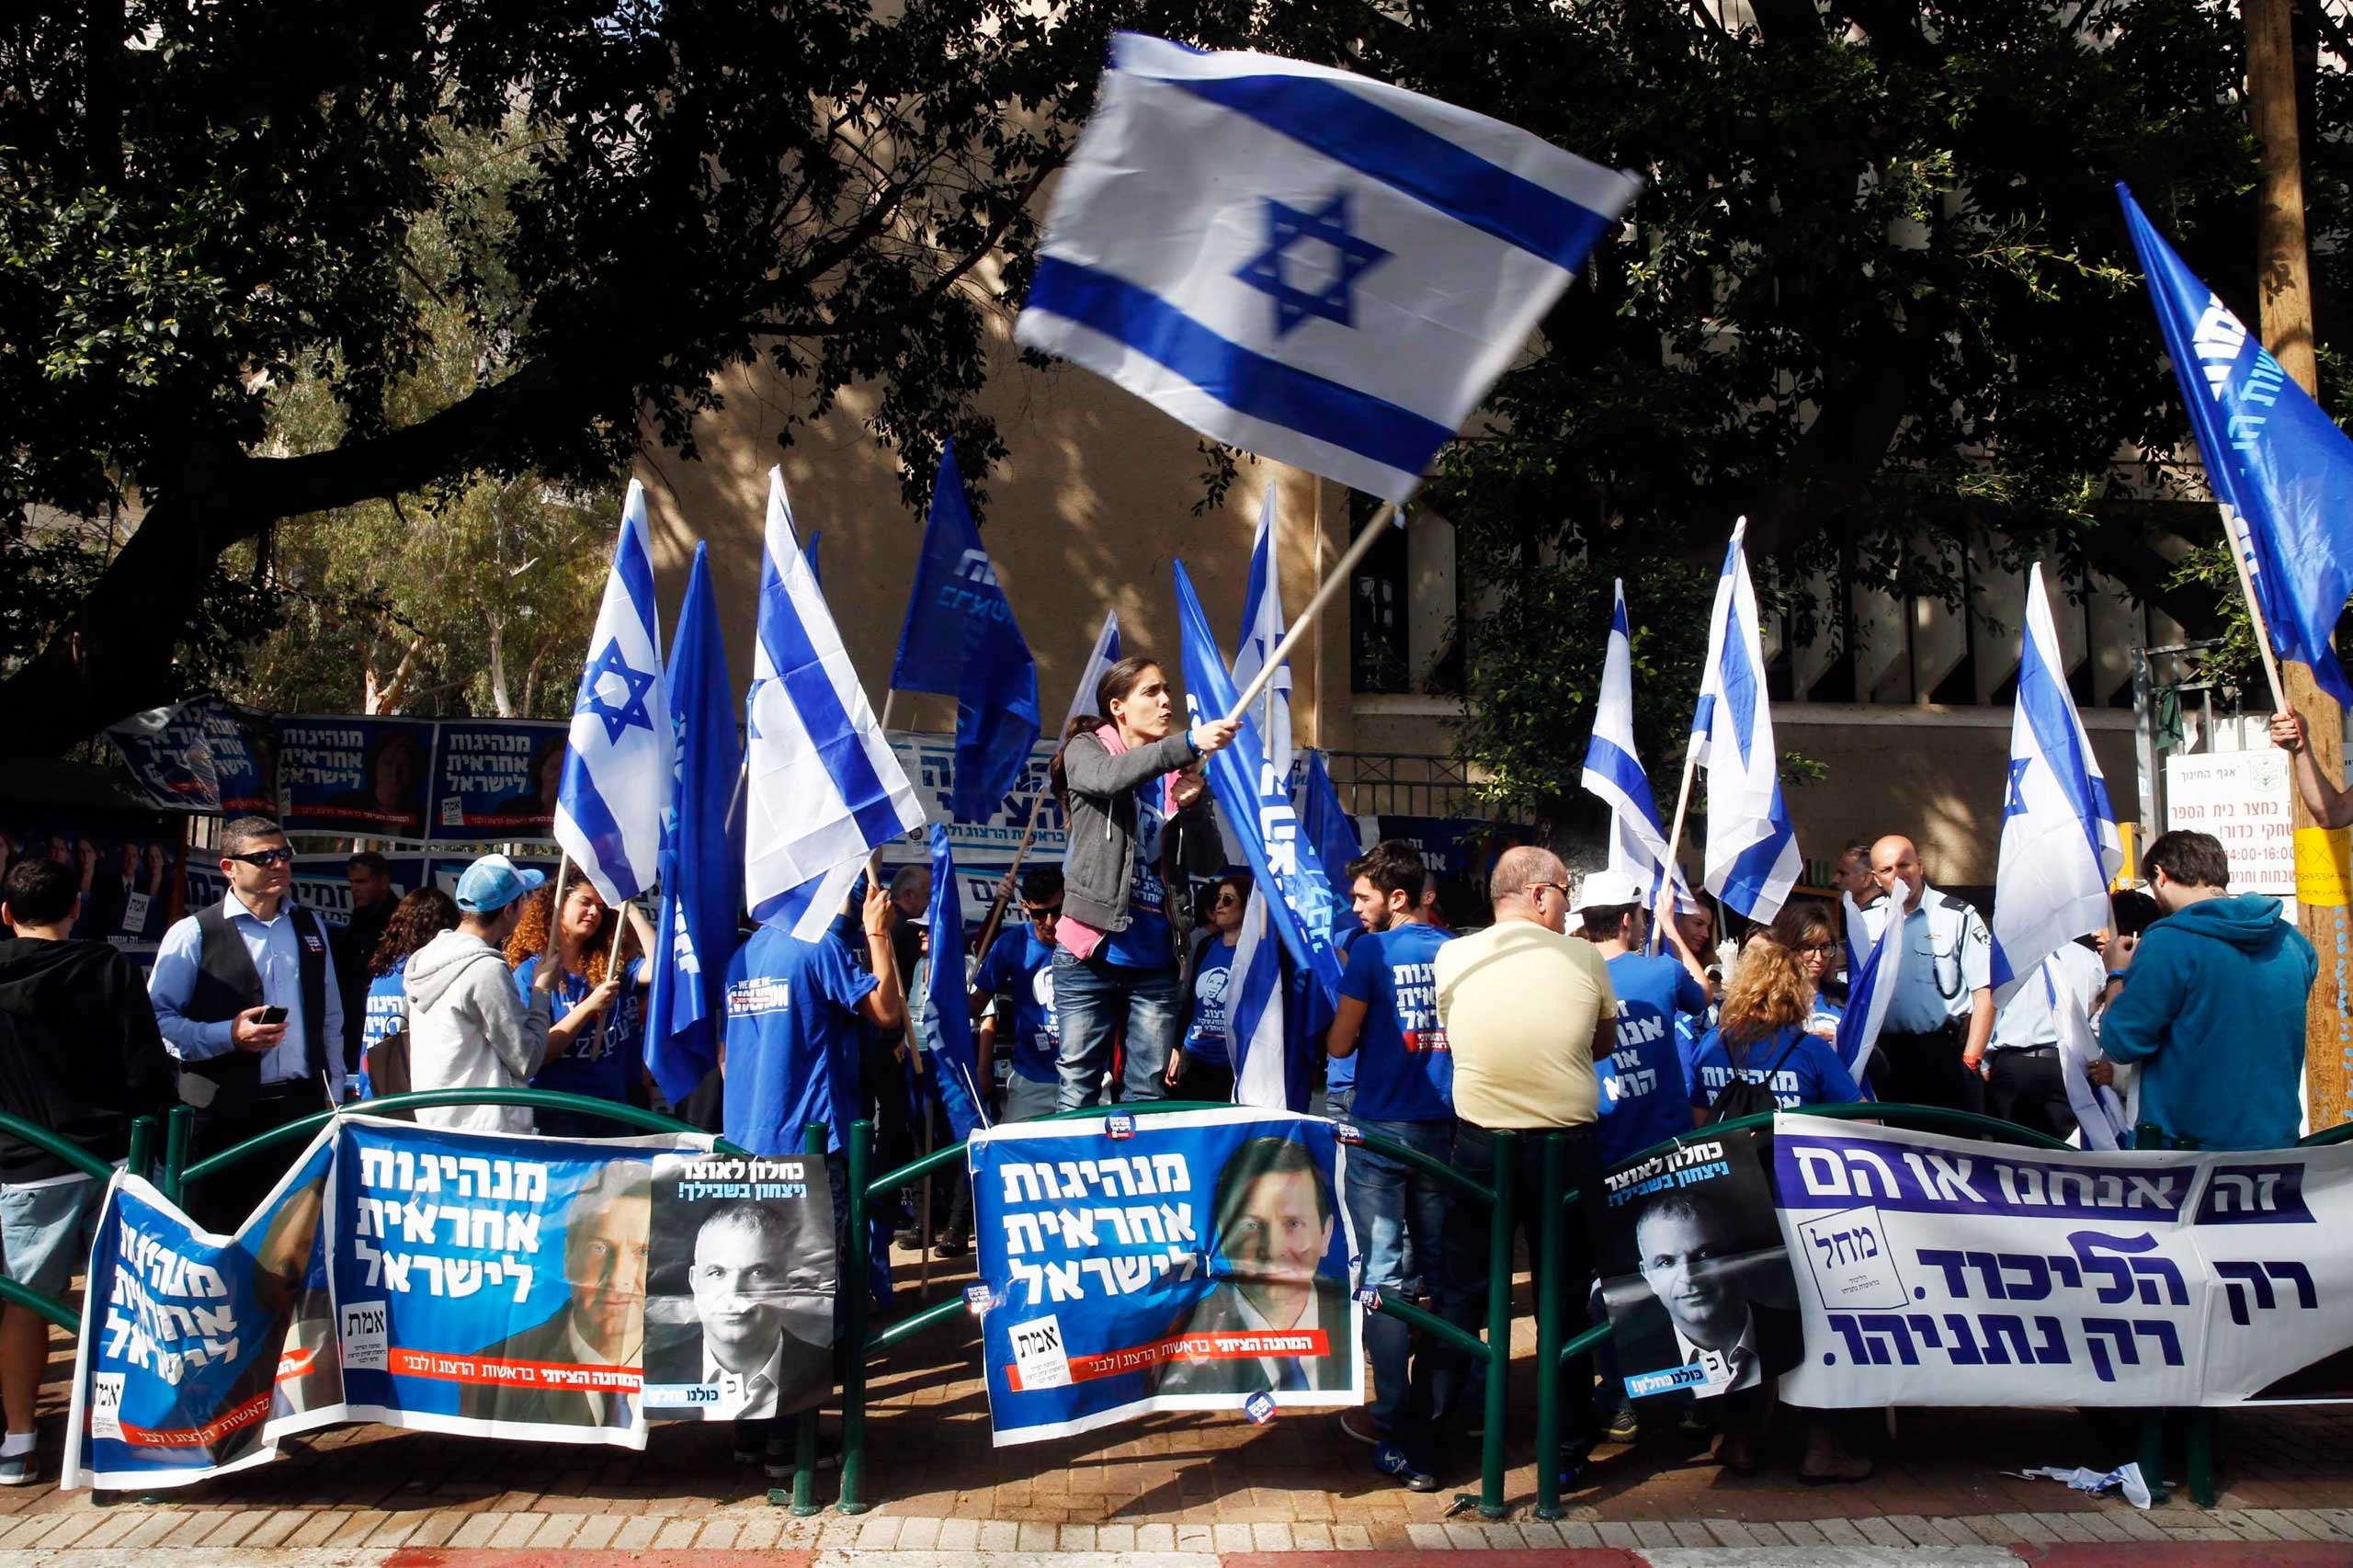 A woman waves an Israeli national flag outside a polling station in Tel Aviv, March 17, 2015.